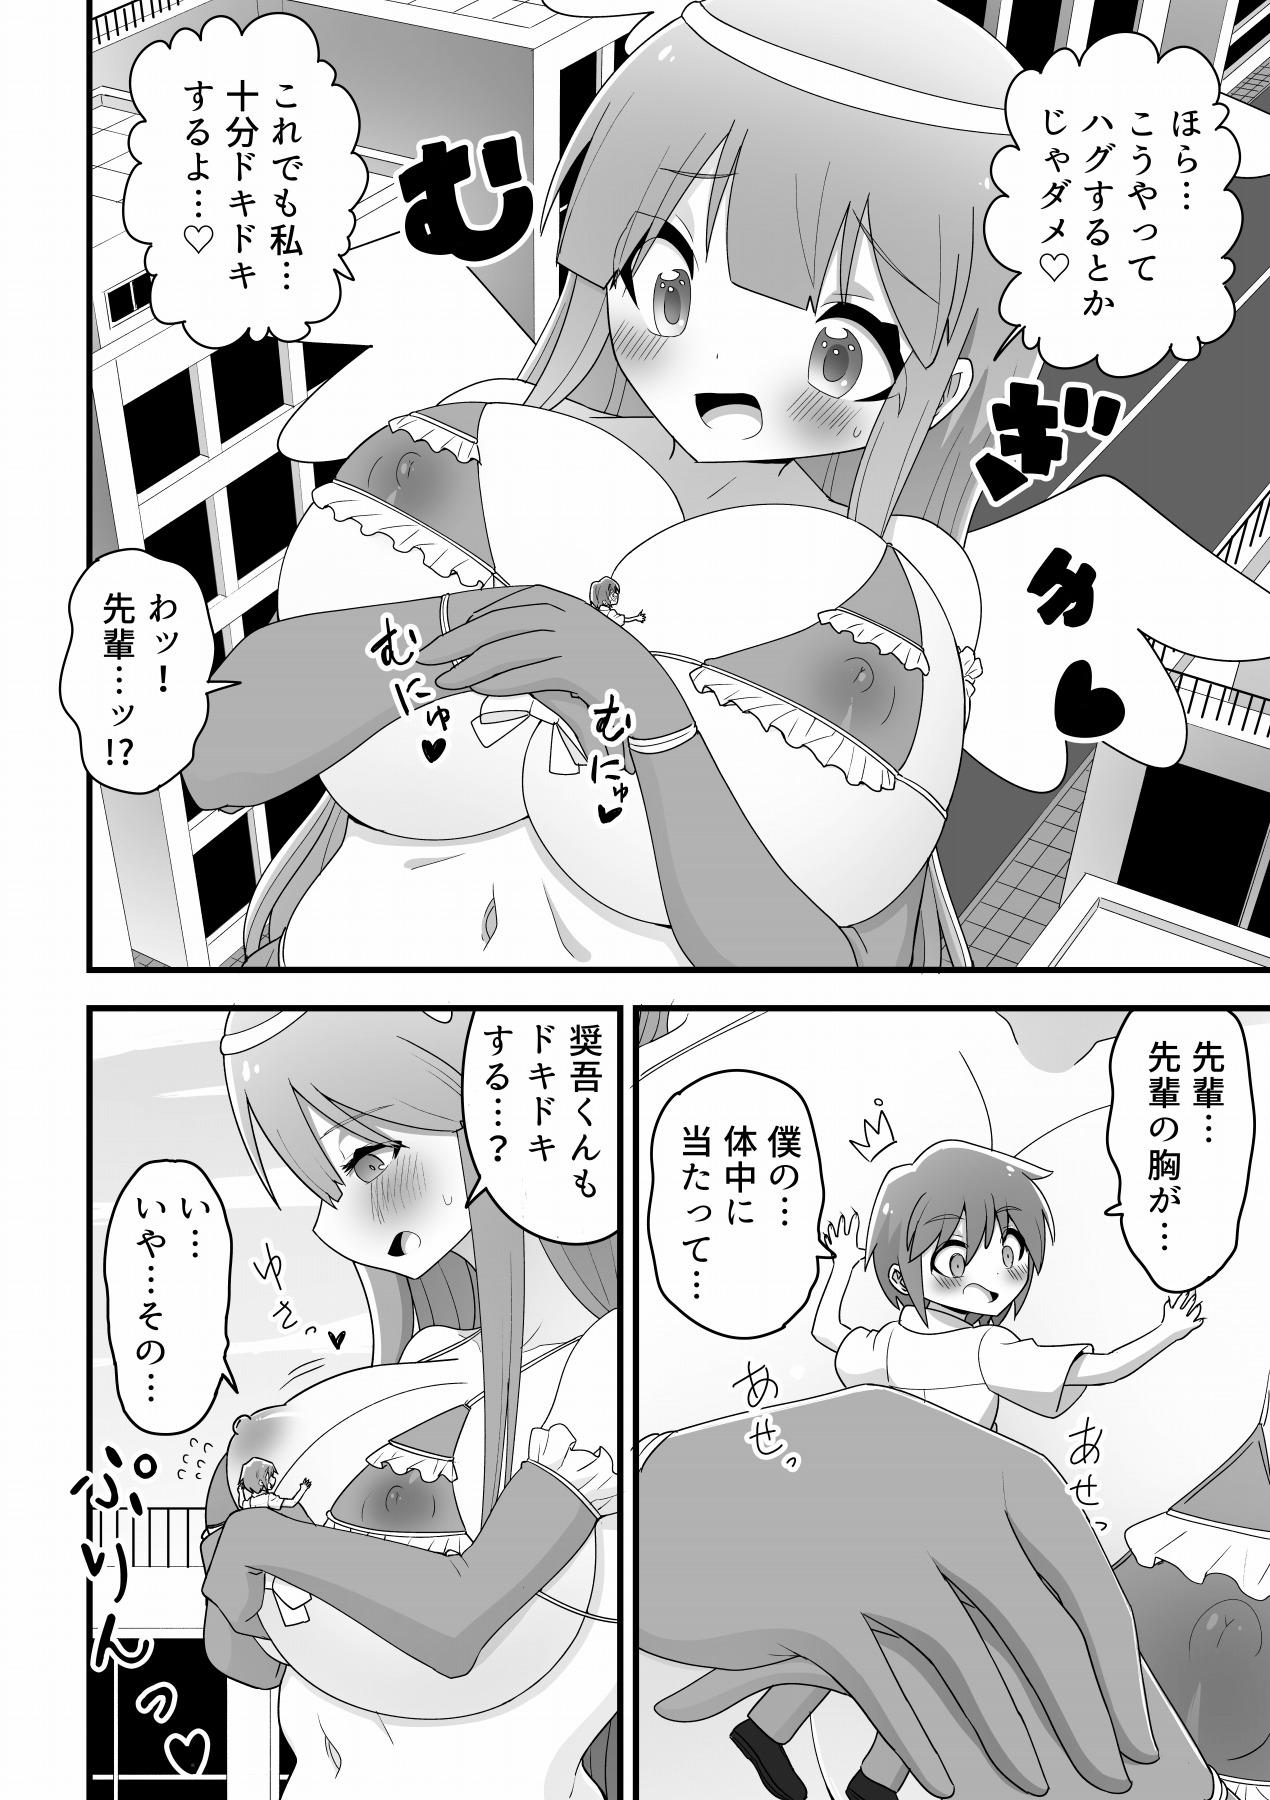 Mas A story about an ordinary school girl becoming a giant magical girl and having sex with a junior boy to save the world - Original Amateur Porn - Page 8